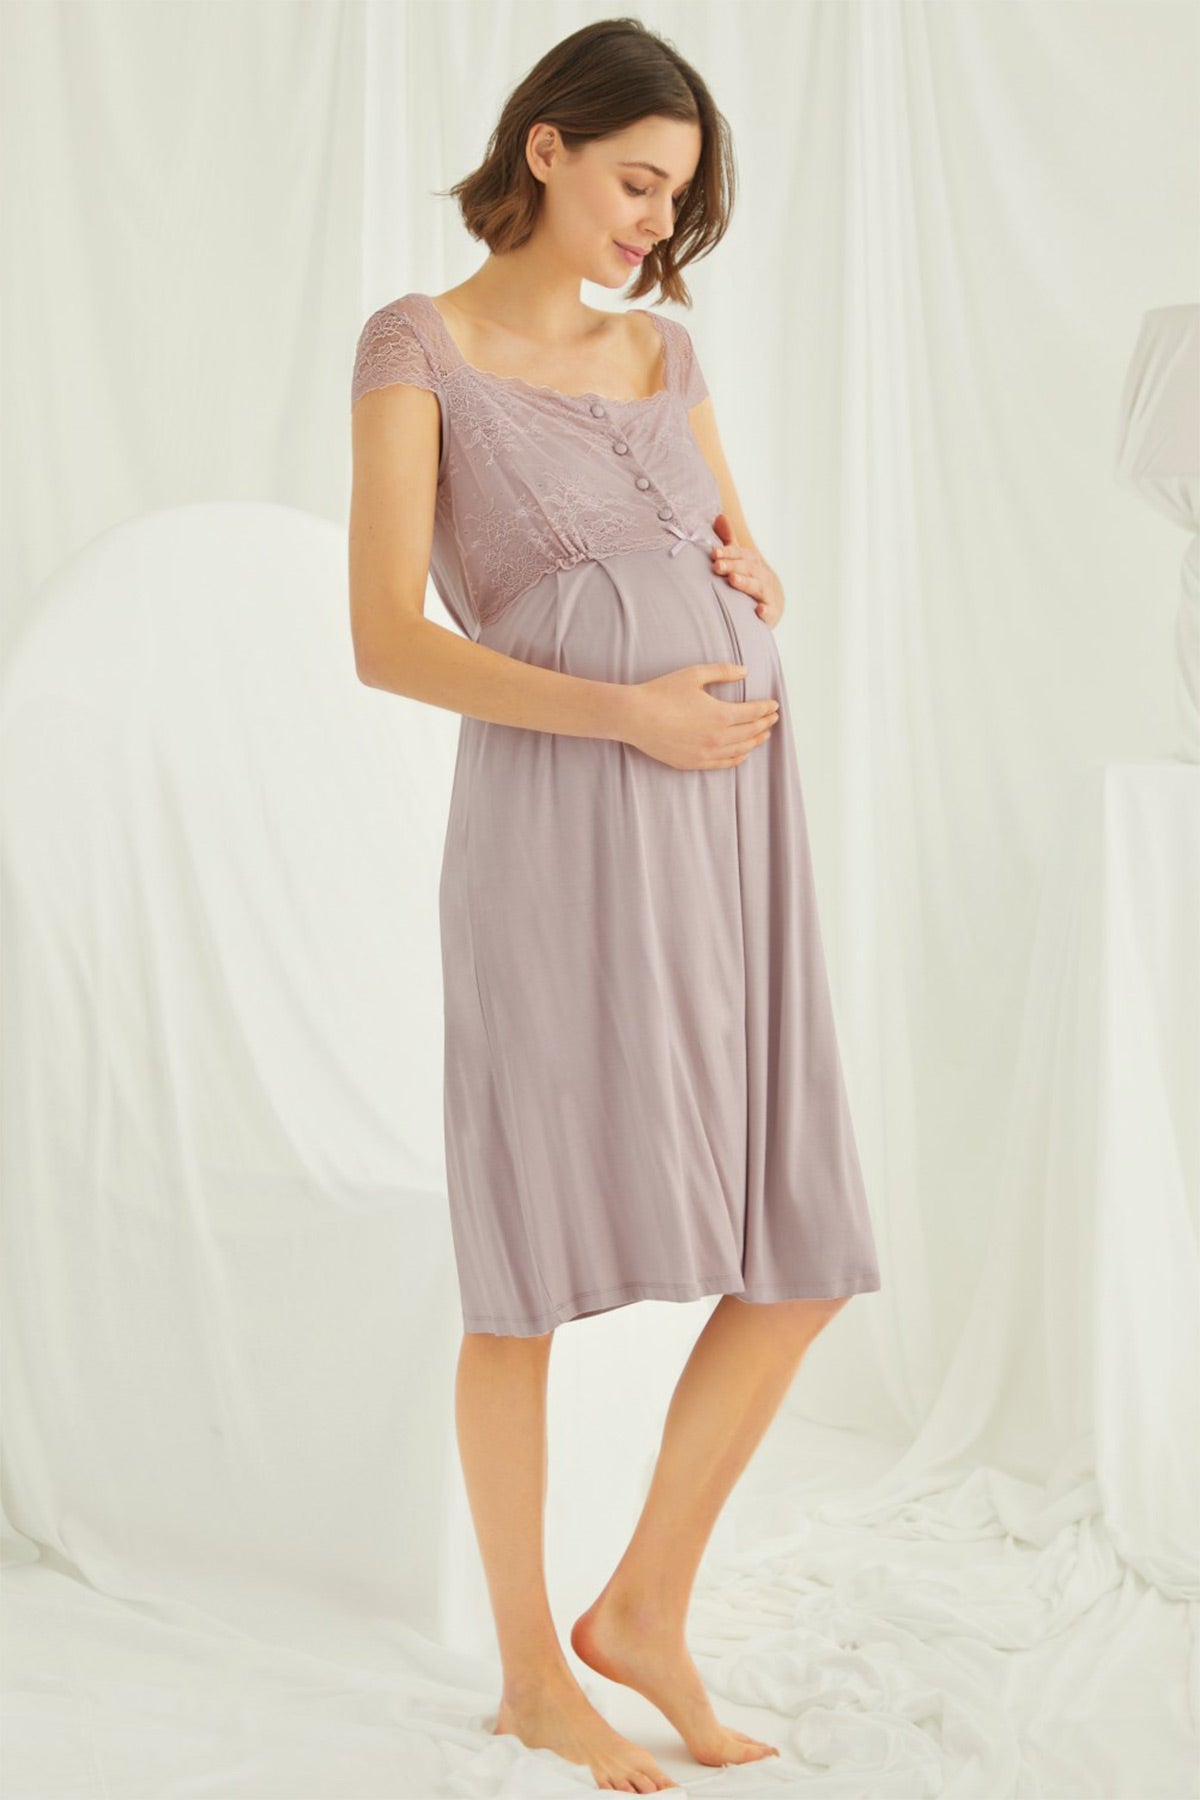 Shopymommy 18439 Lace Maternity & Nursing Nightgown Coffee